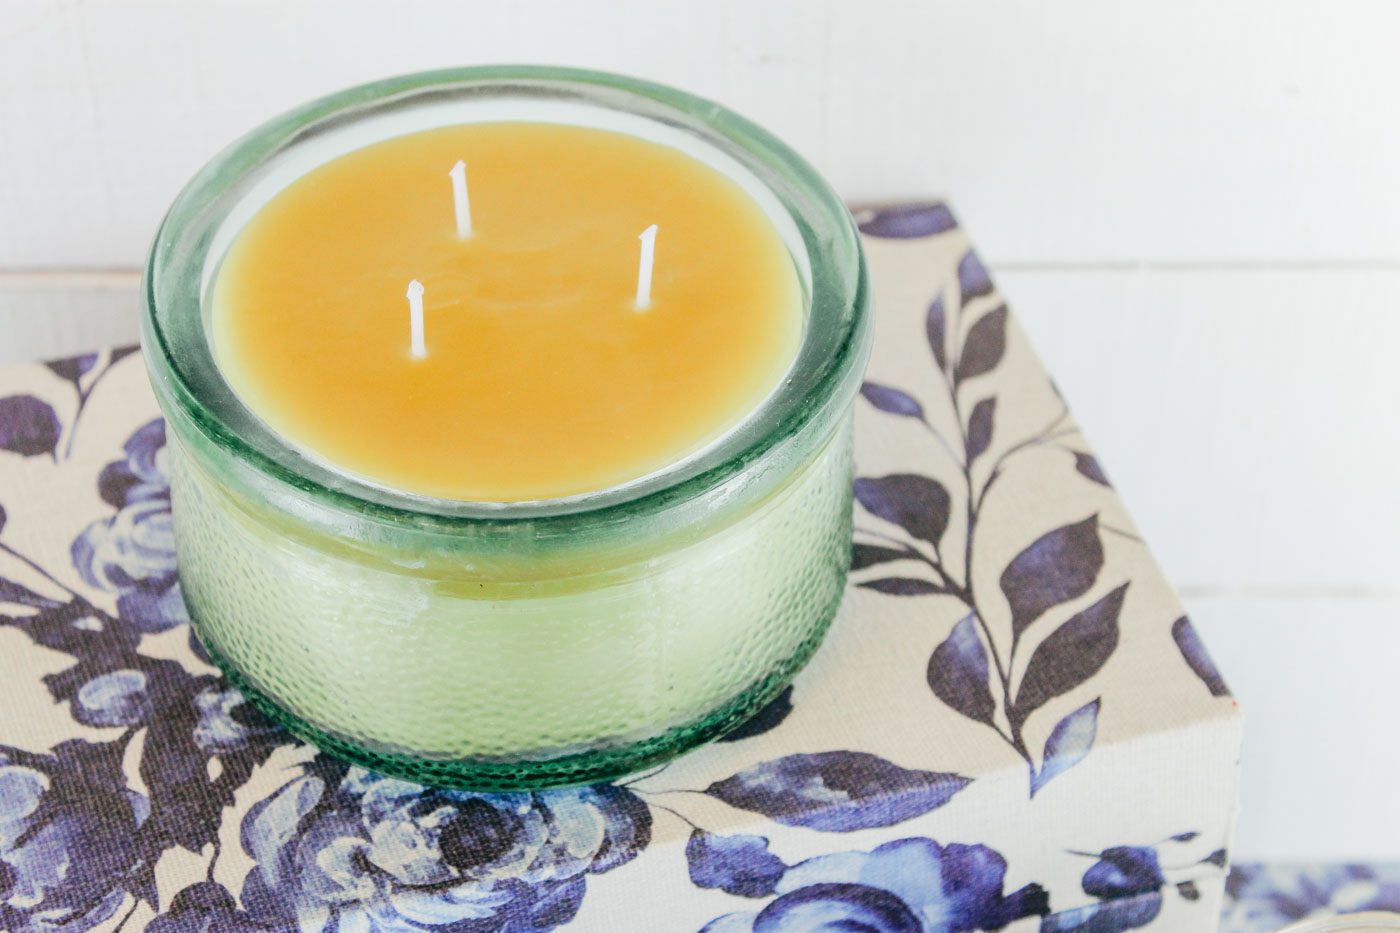 How to Make Beeswax Candles at Home